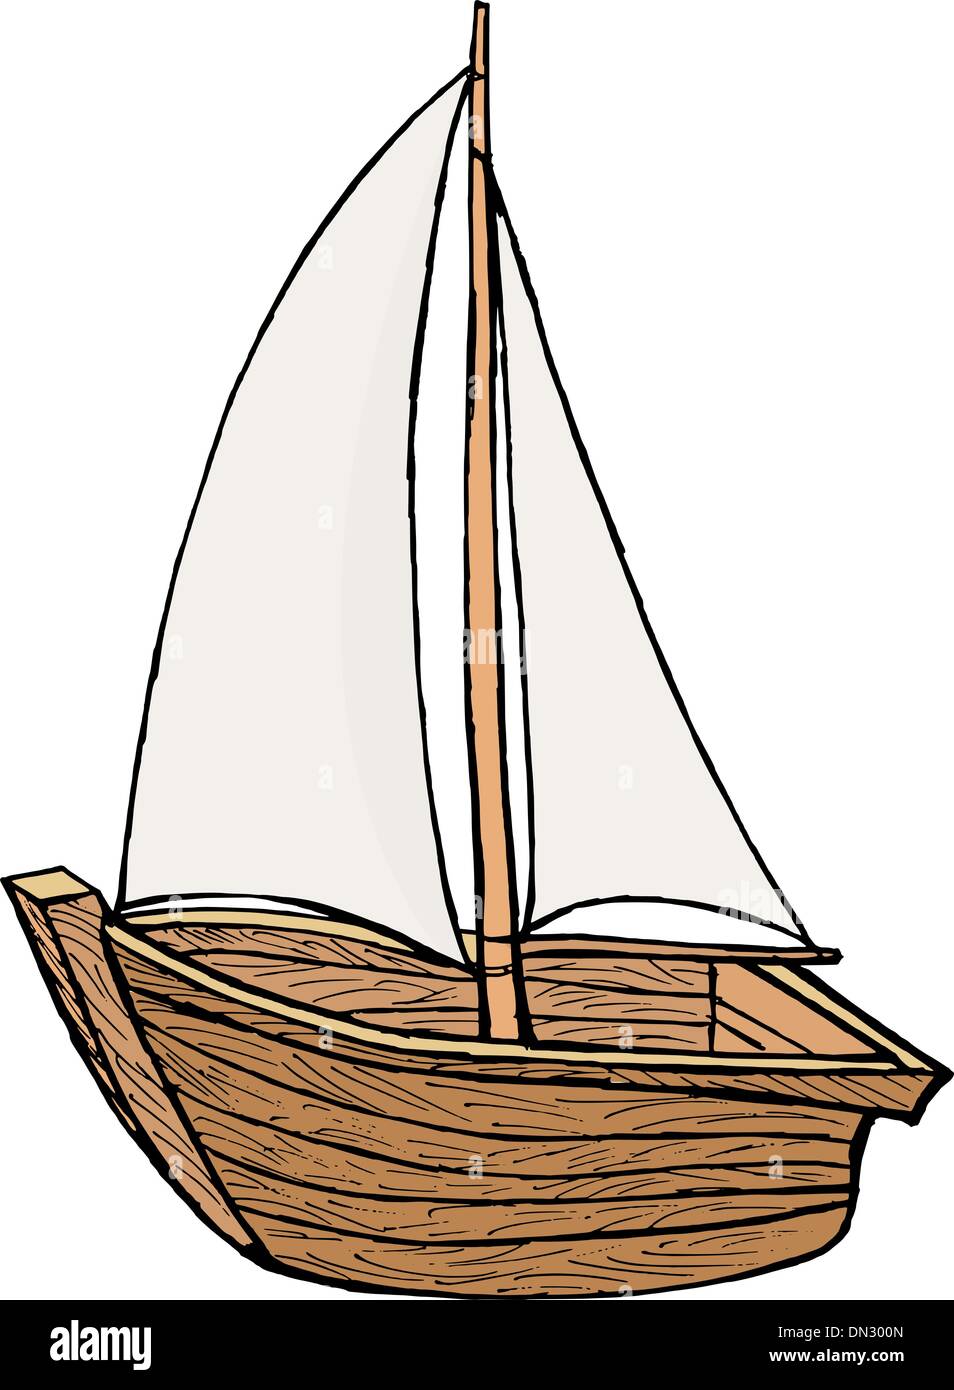 sailboat toy, vector image Stock Vector